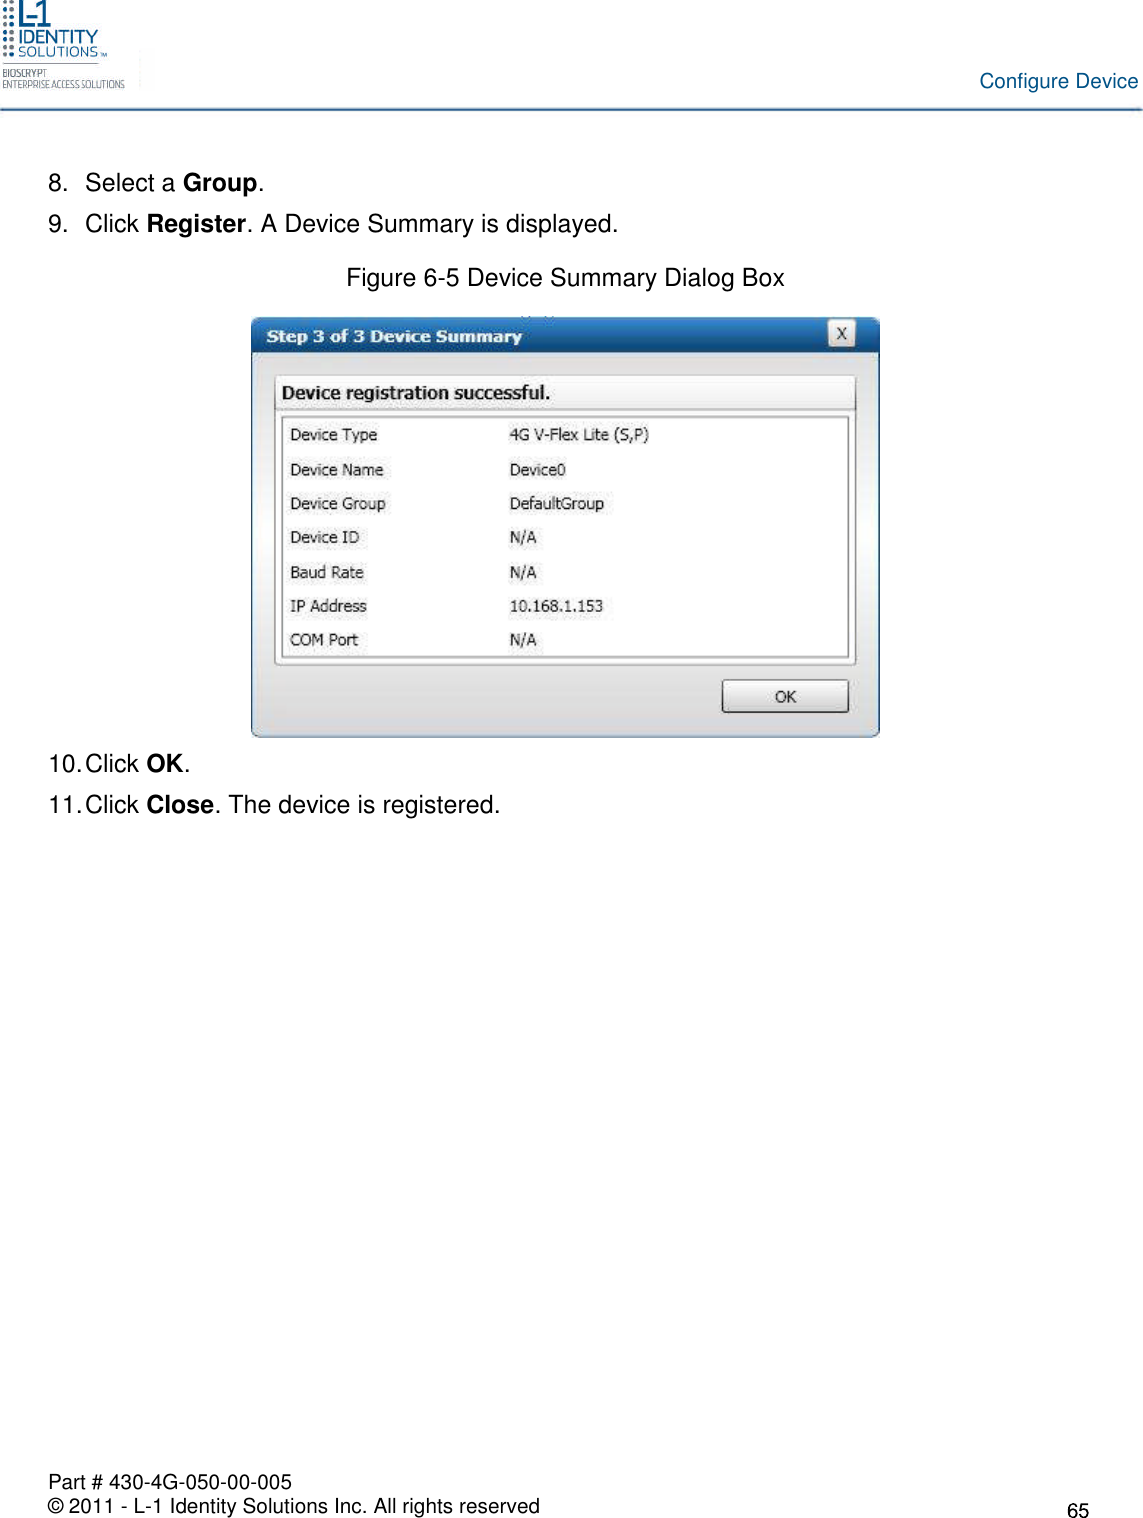 Part # 430-4G-050-00-005© 2011 - L-1 Identity Solutions Inc. All rights reservedConfigure Device8. Select a Group.9. Click Register. A Device Summary is displayed.Figure 6-5 Device Summary Dialog Box10.Click OK.11.Click Close. The device is registered.